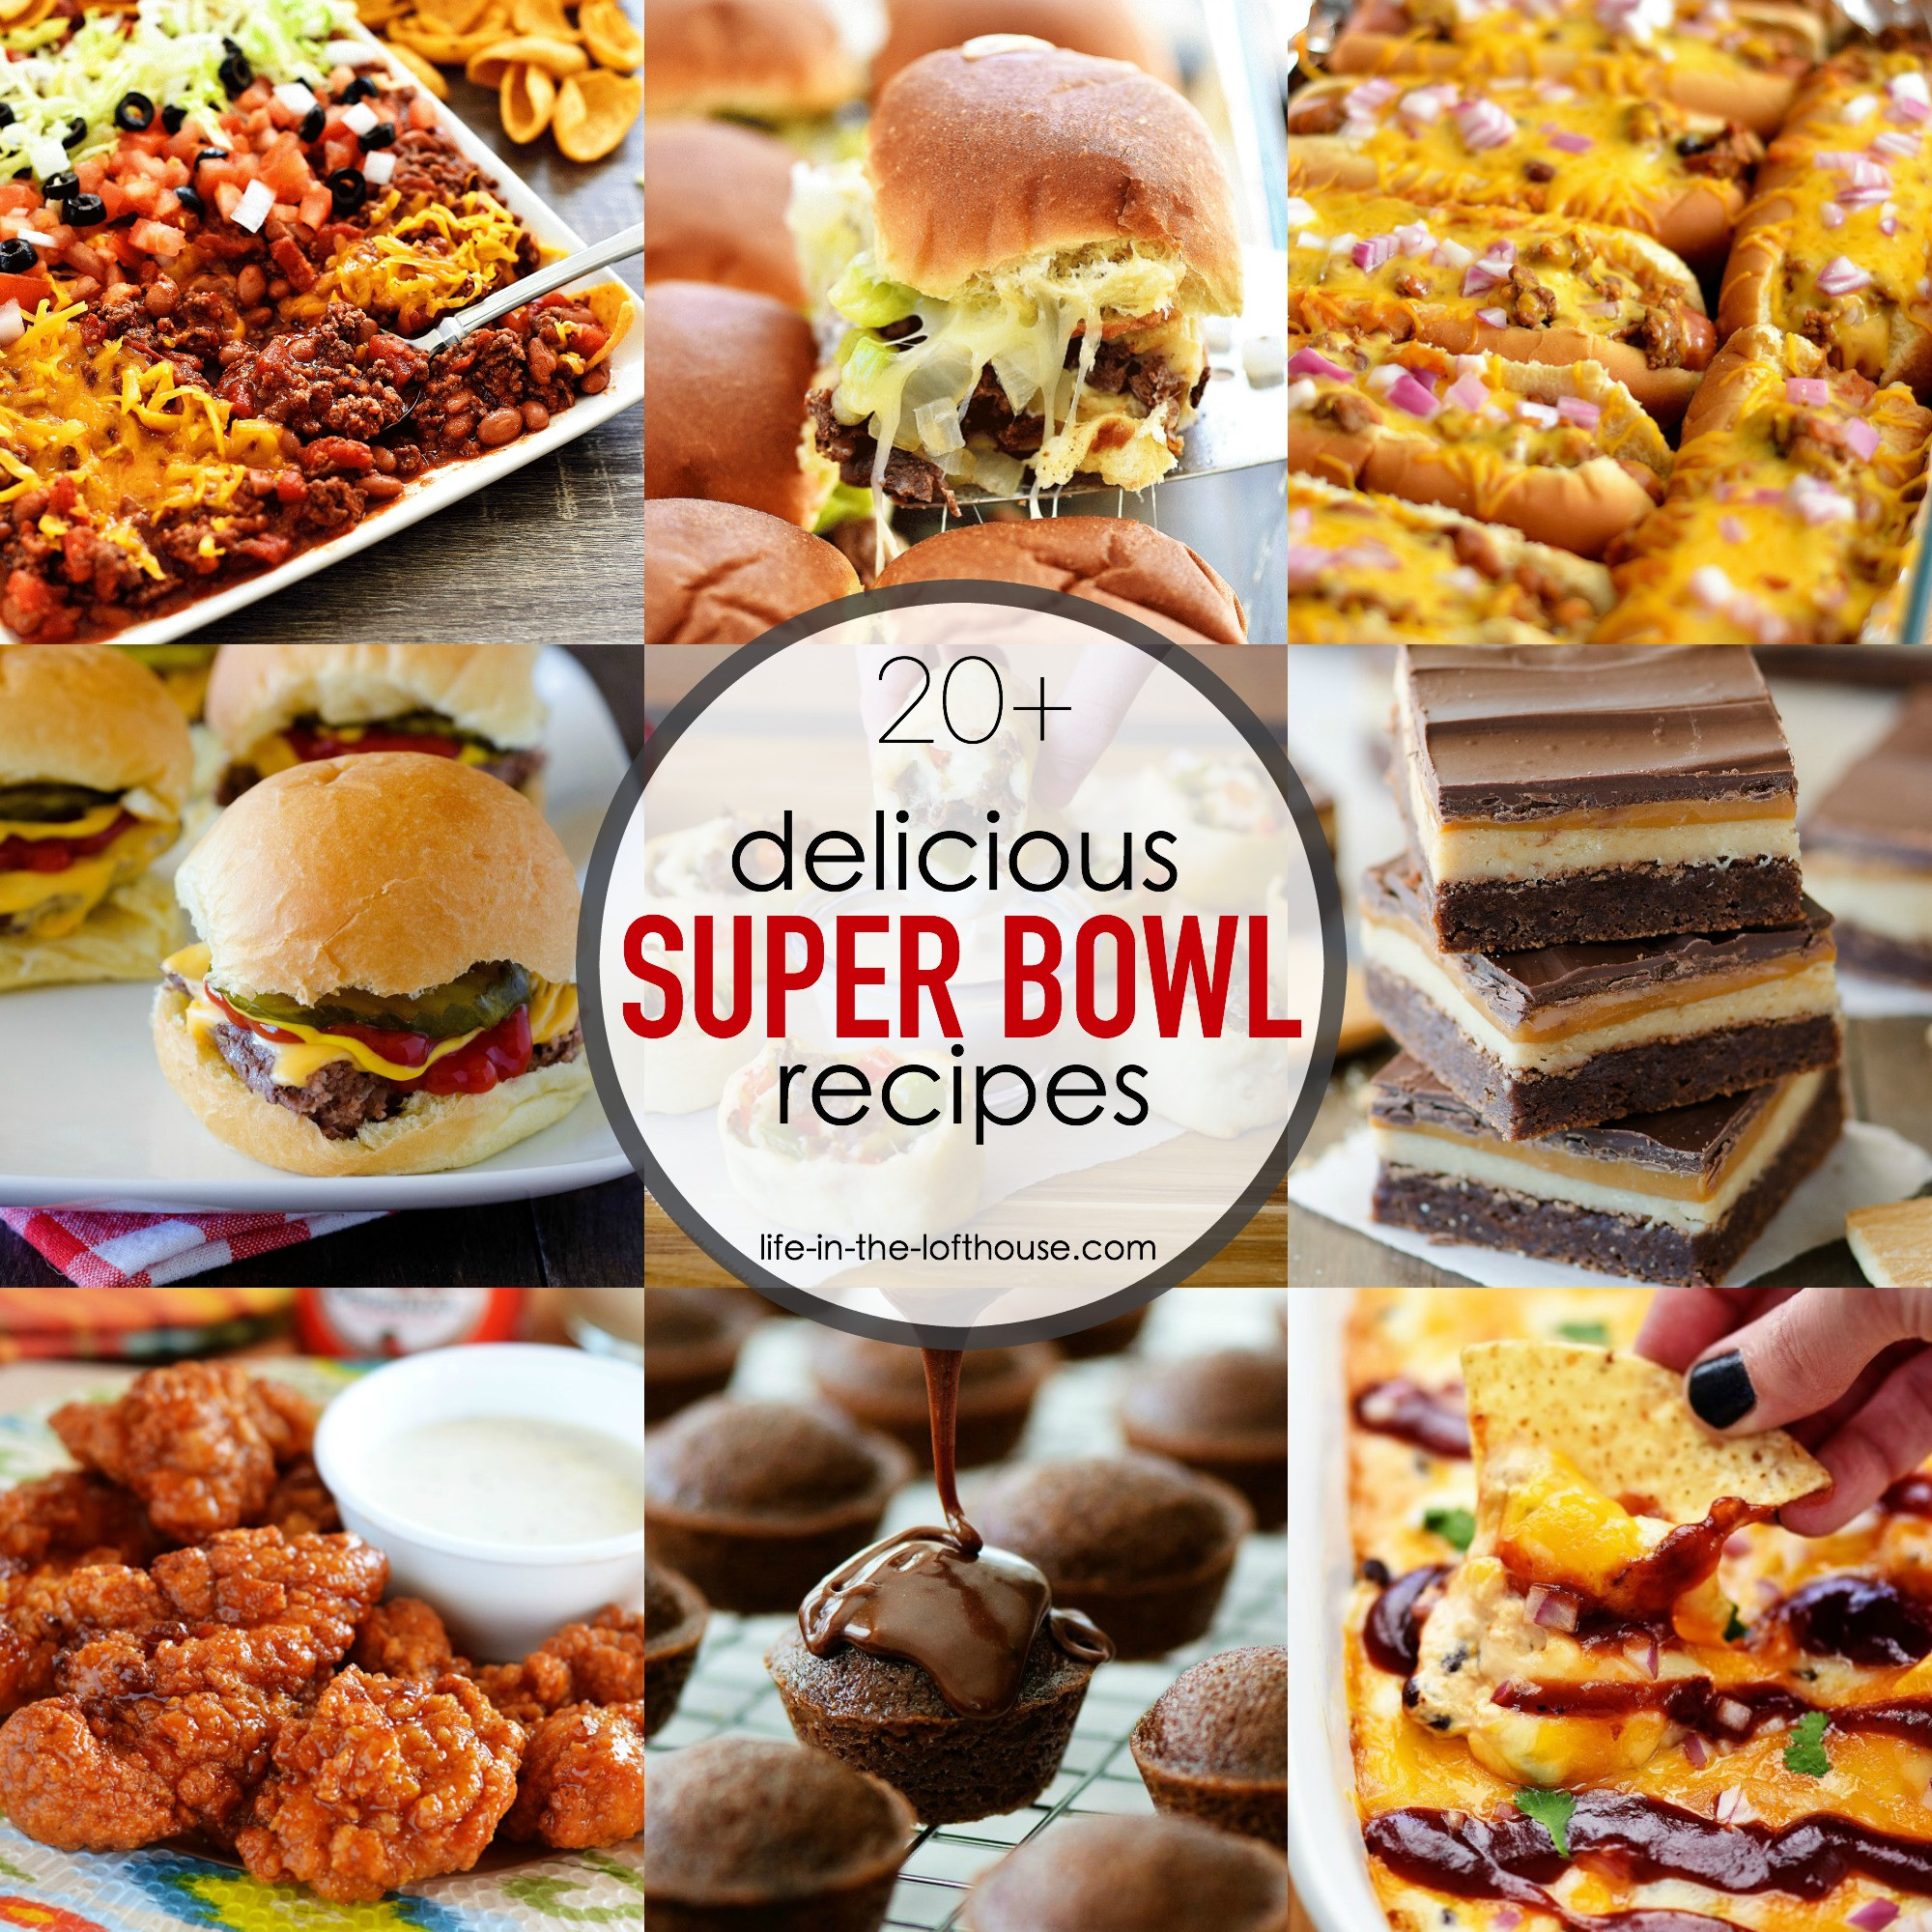 Superbowl Snacks Recipes
 20 Super Bowl Recipes Life In The Lofthouse